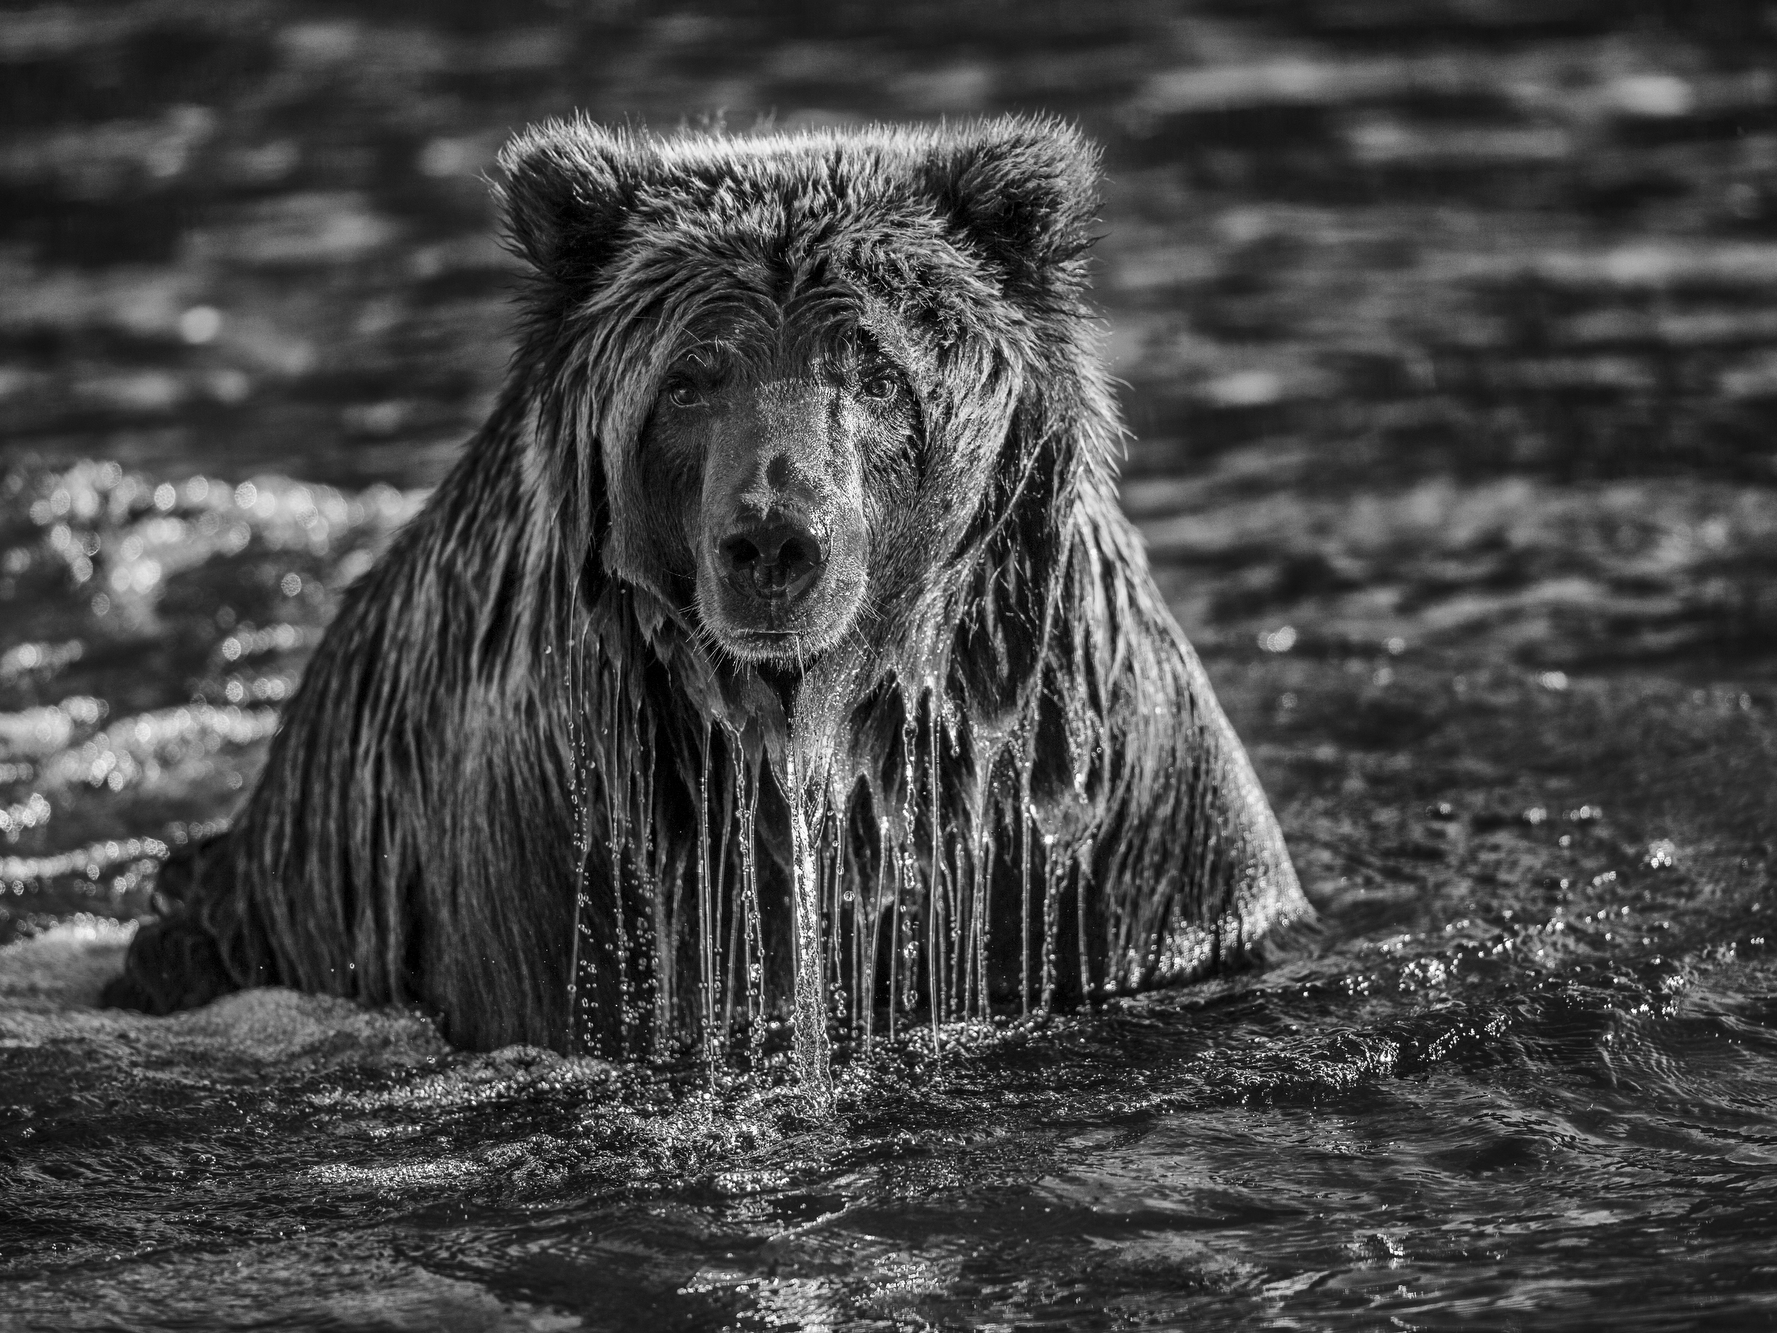 Grizzly Bears and other wildlife along the Fishing Branch River in the Yukon.